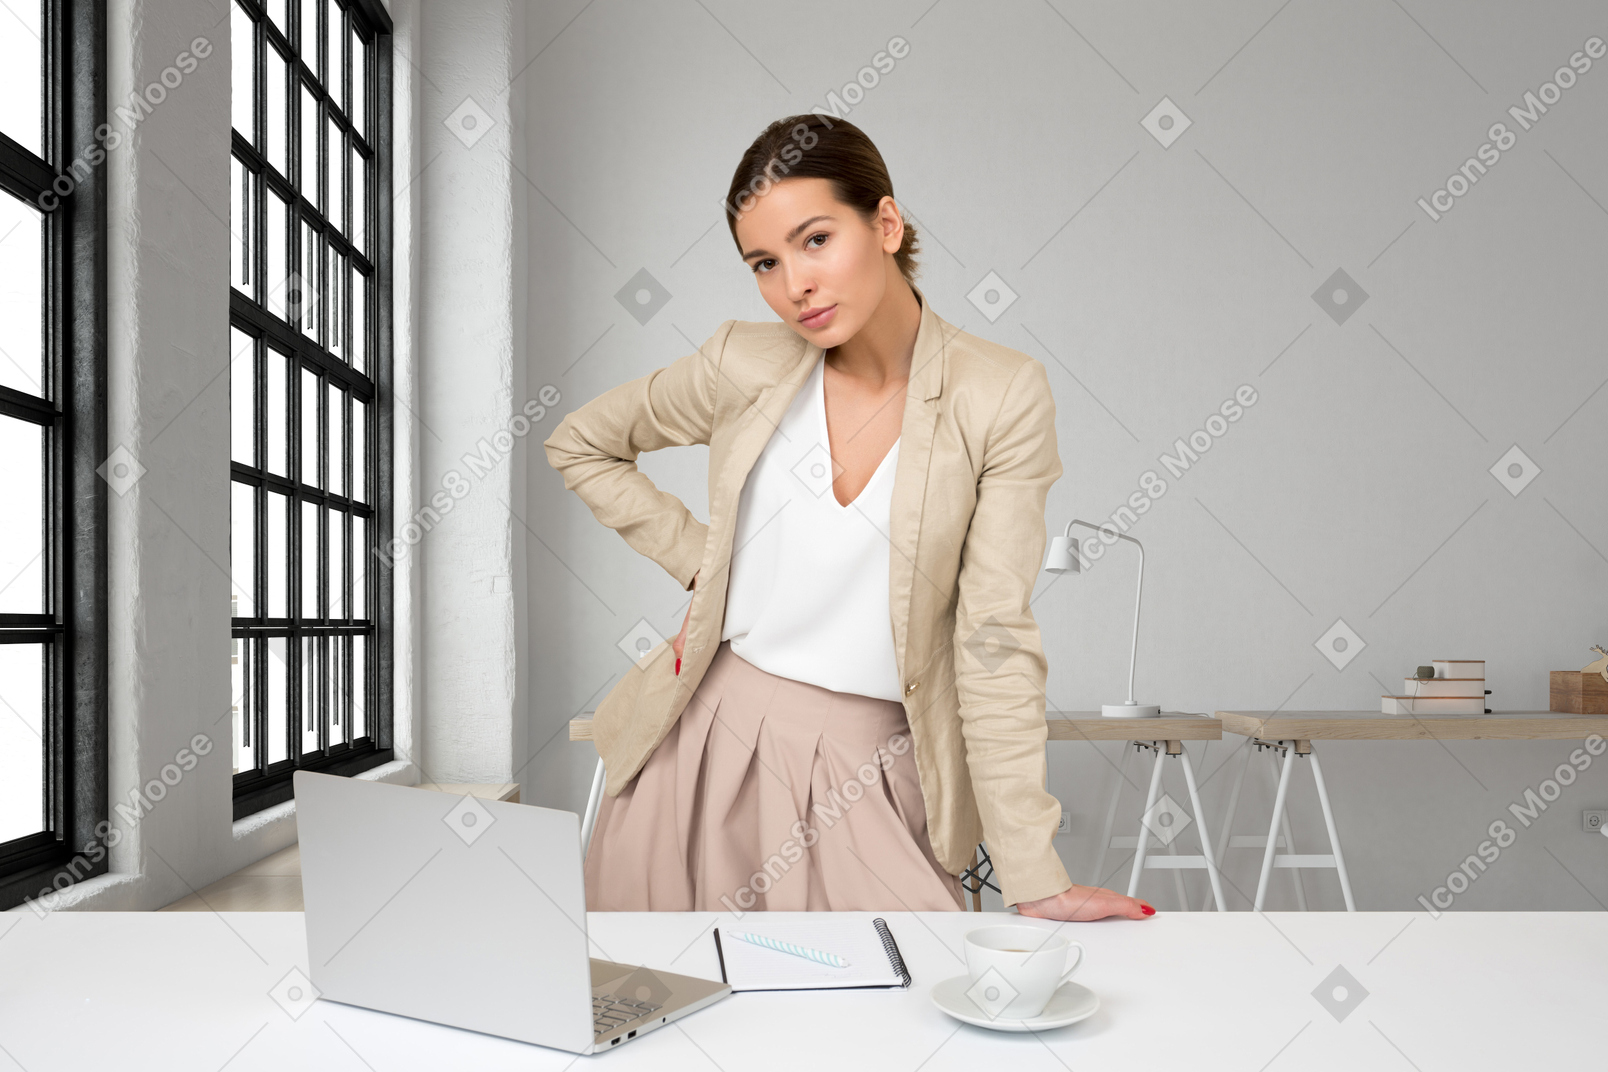 A business woman standing at a desk with a laptop